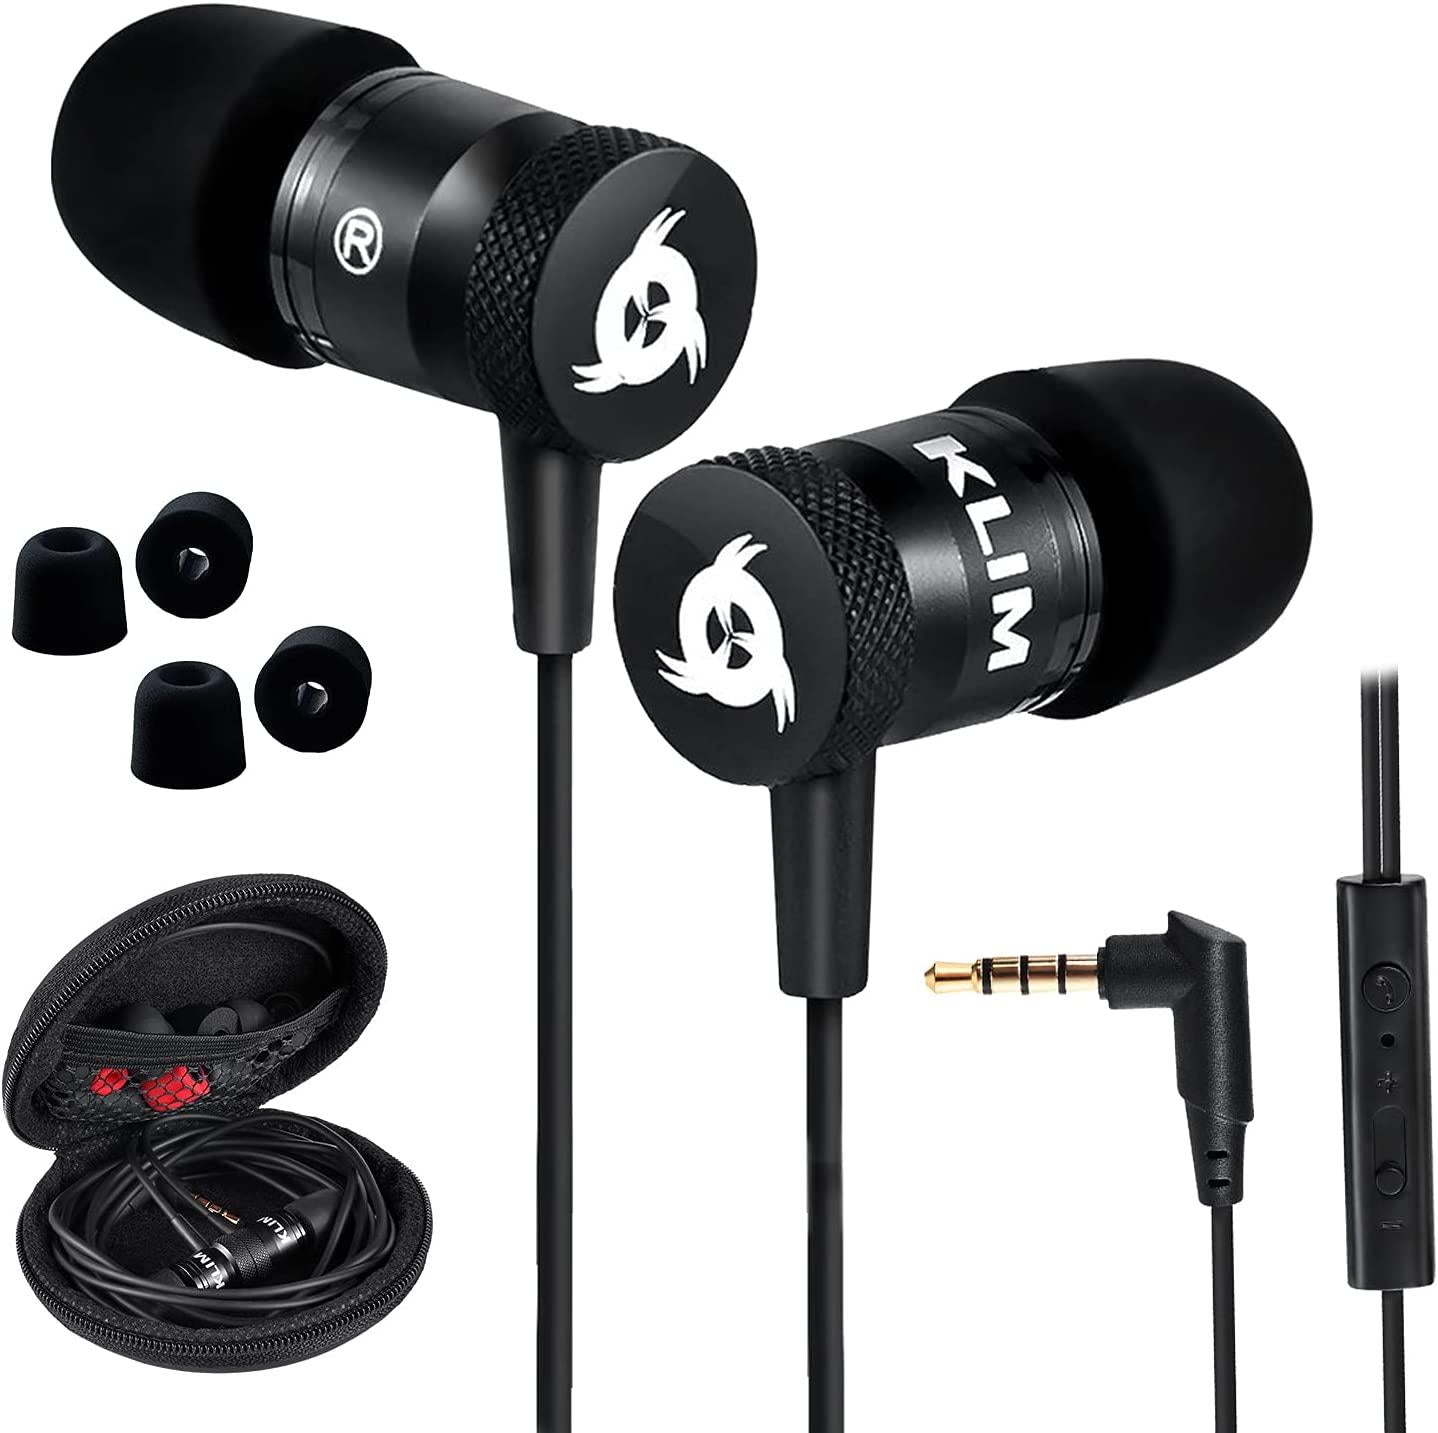 KLIM, KLIM Fusion - in Ear Headphones with Mic + Excellent Audio Quality + Long-Lasting Ear Buds + 5 Years Warranty + Wired Headphones with Memory Foam Tips + 3.5 mm Jack + New 2022 Version Black